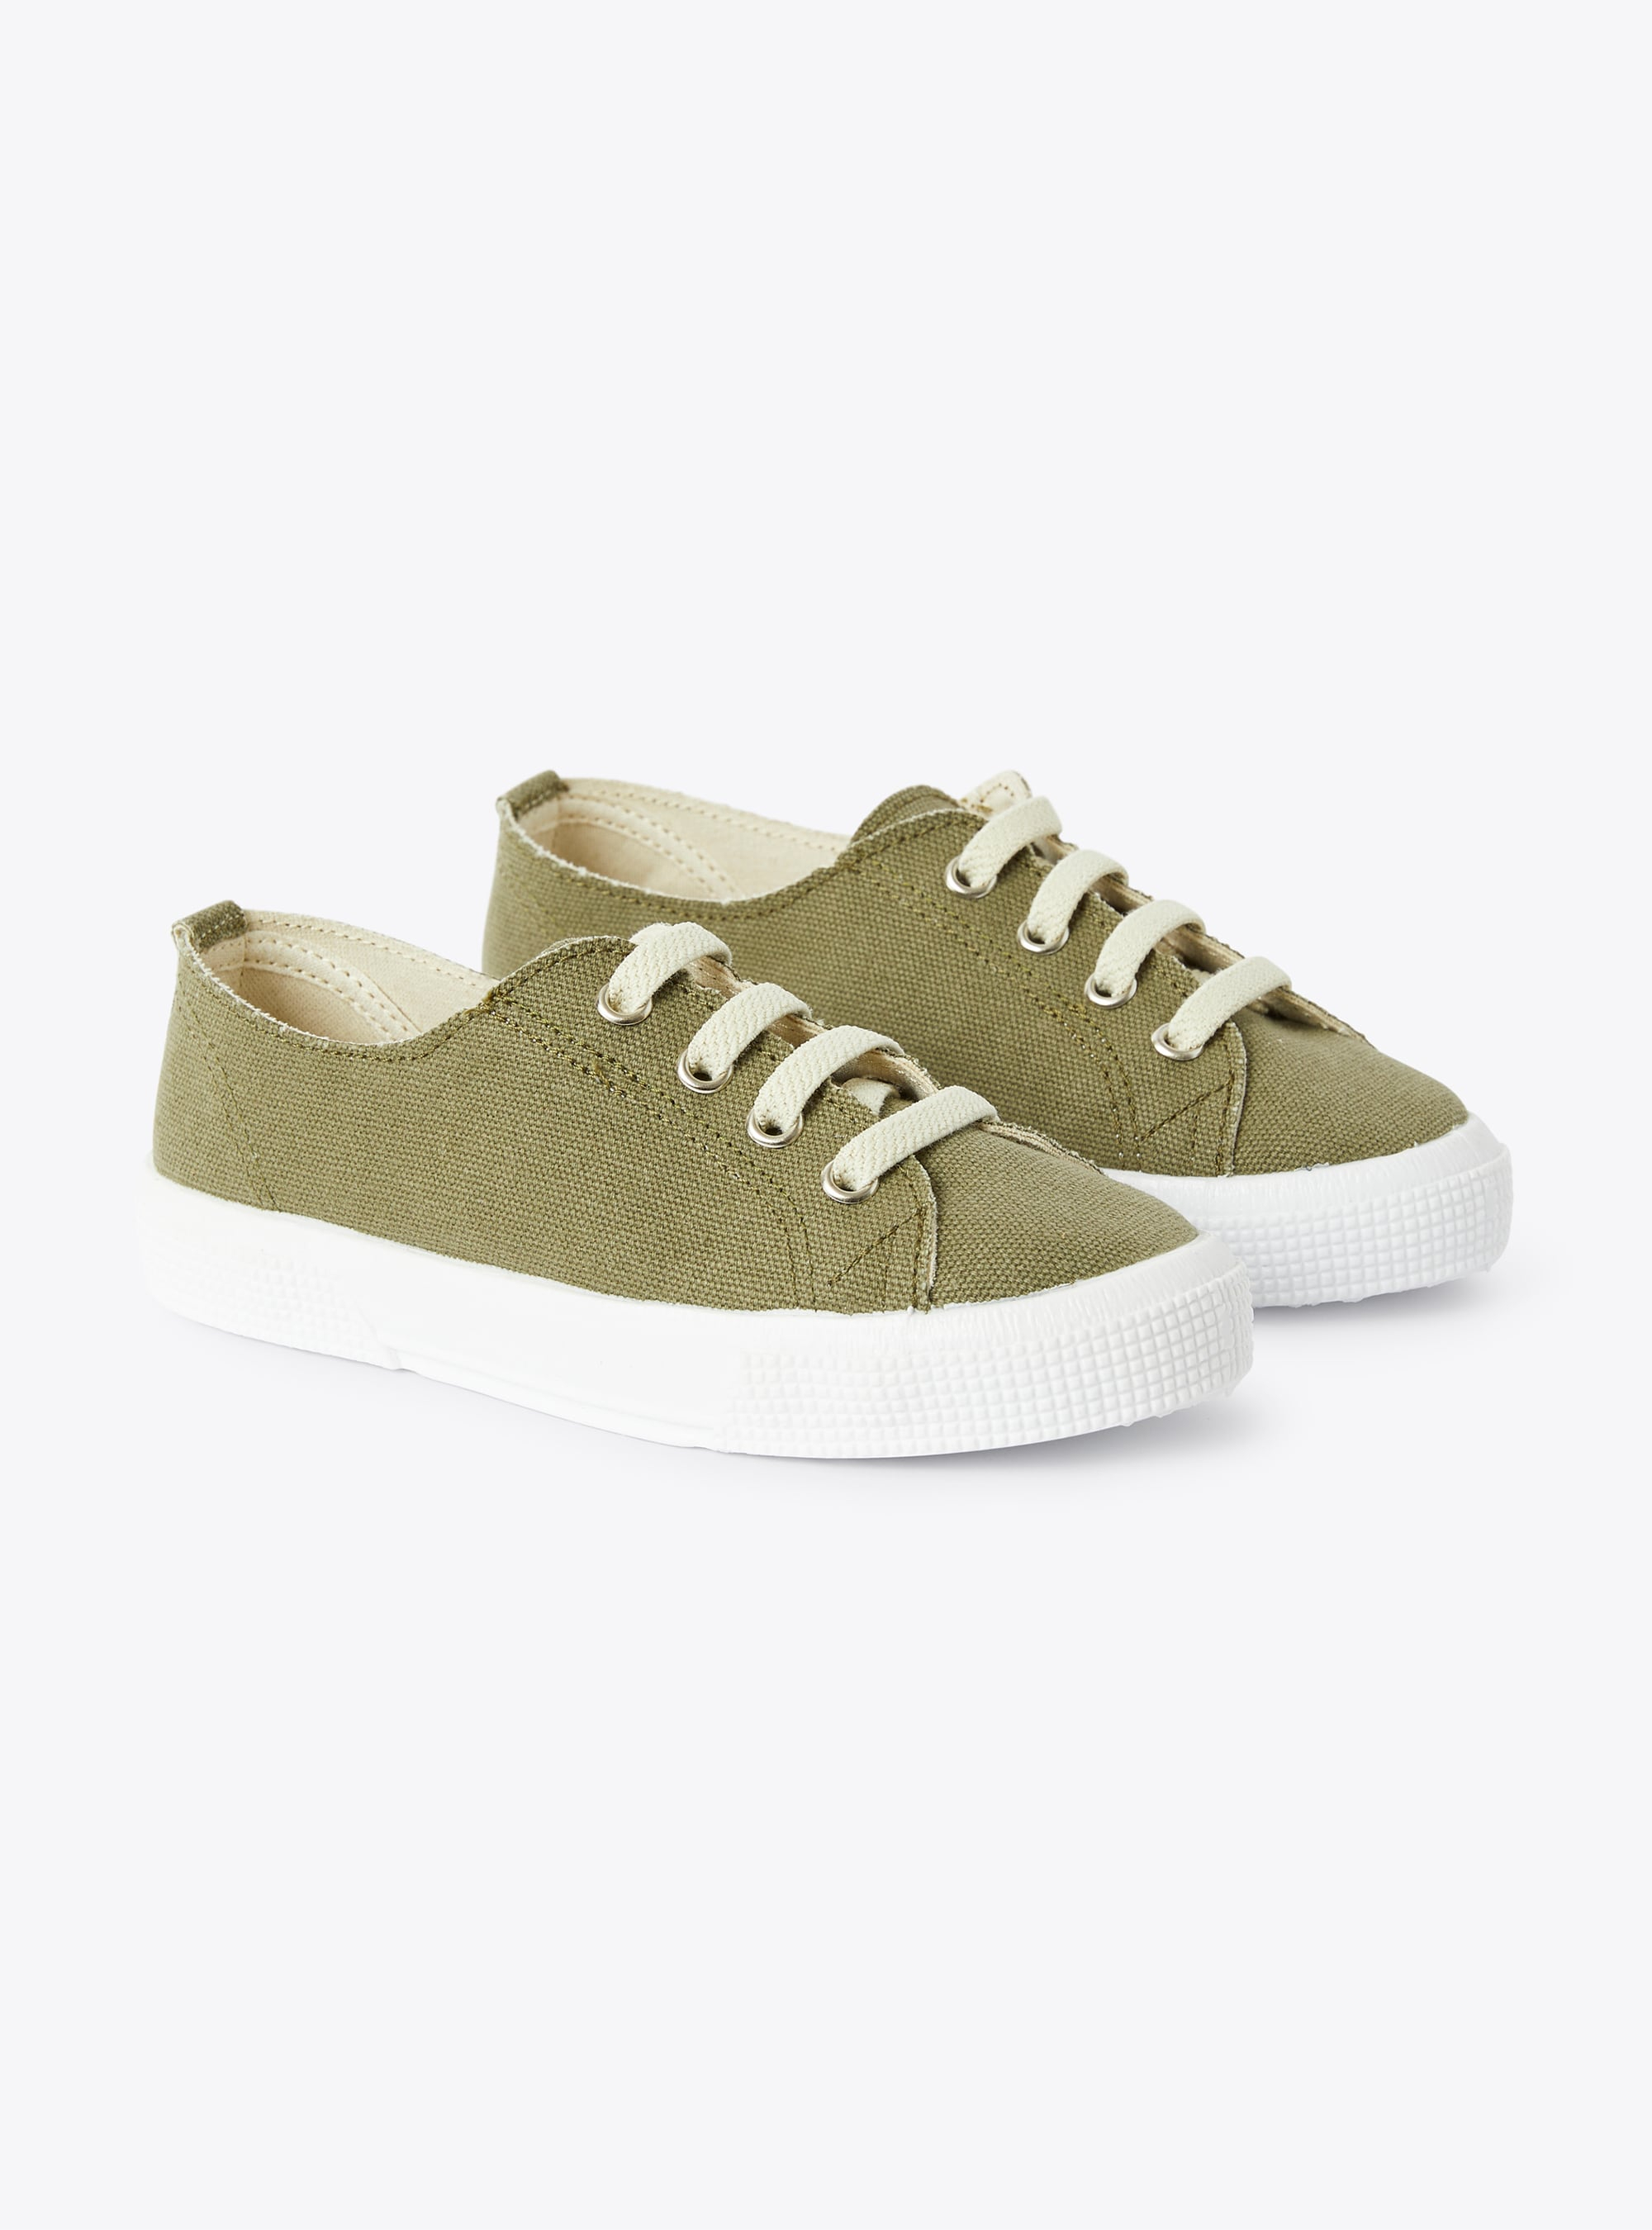 Sneakers in sage-green canvas - Green | Il Gufo